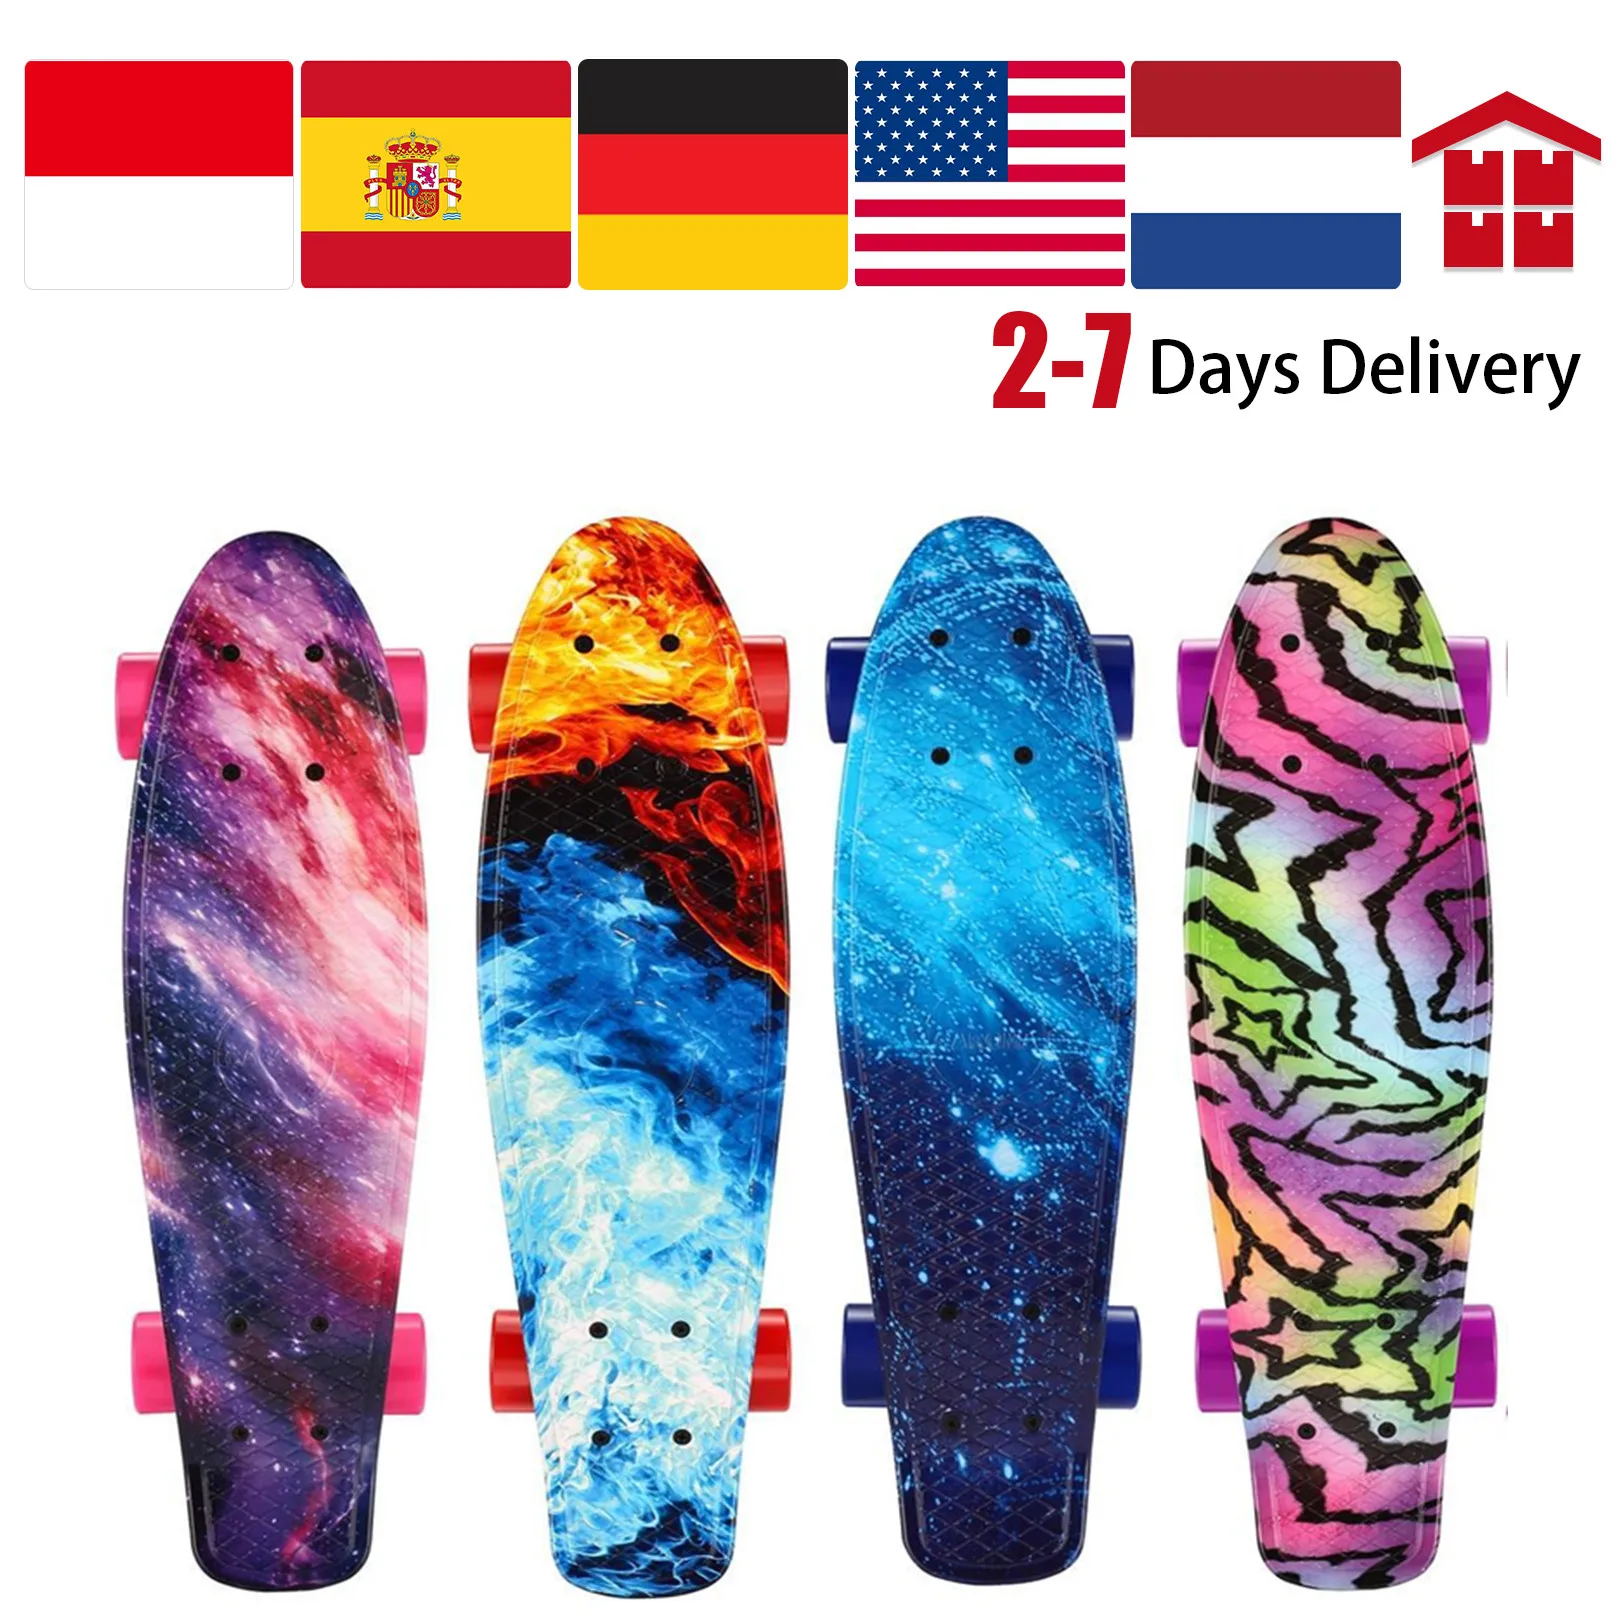 

Complete Skate Boards Skateboard for Beginners Teens Girls Boys with LED Wheels 60x45mm PU Wheel 85A